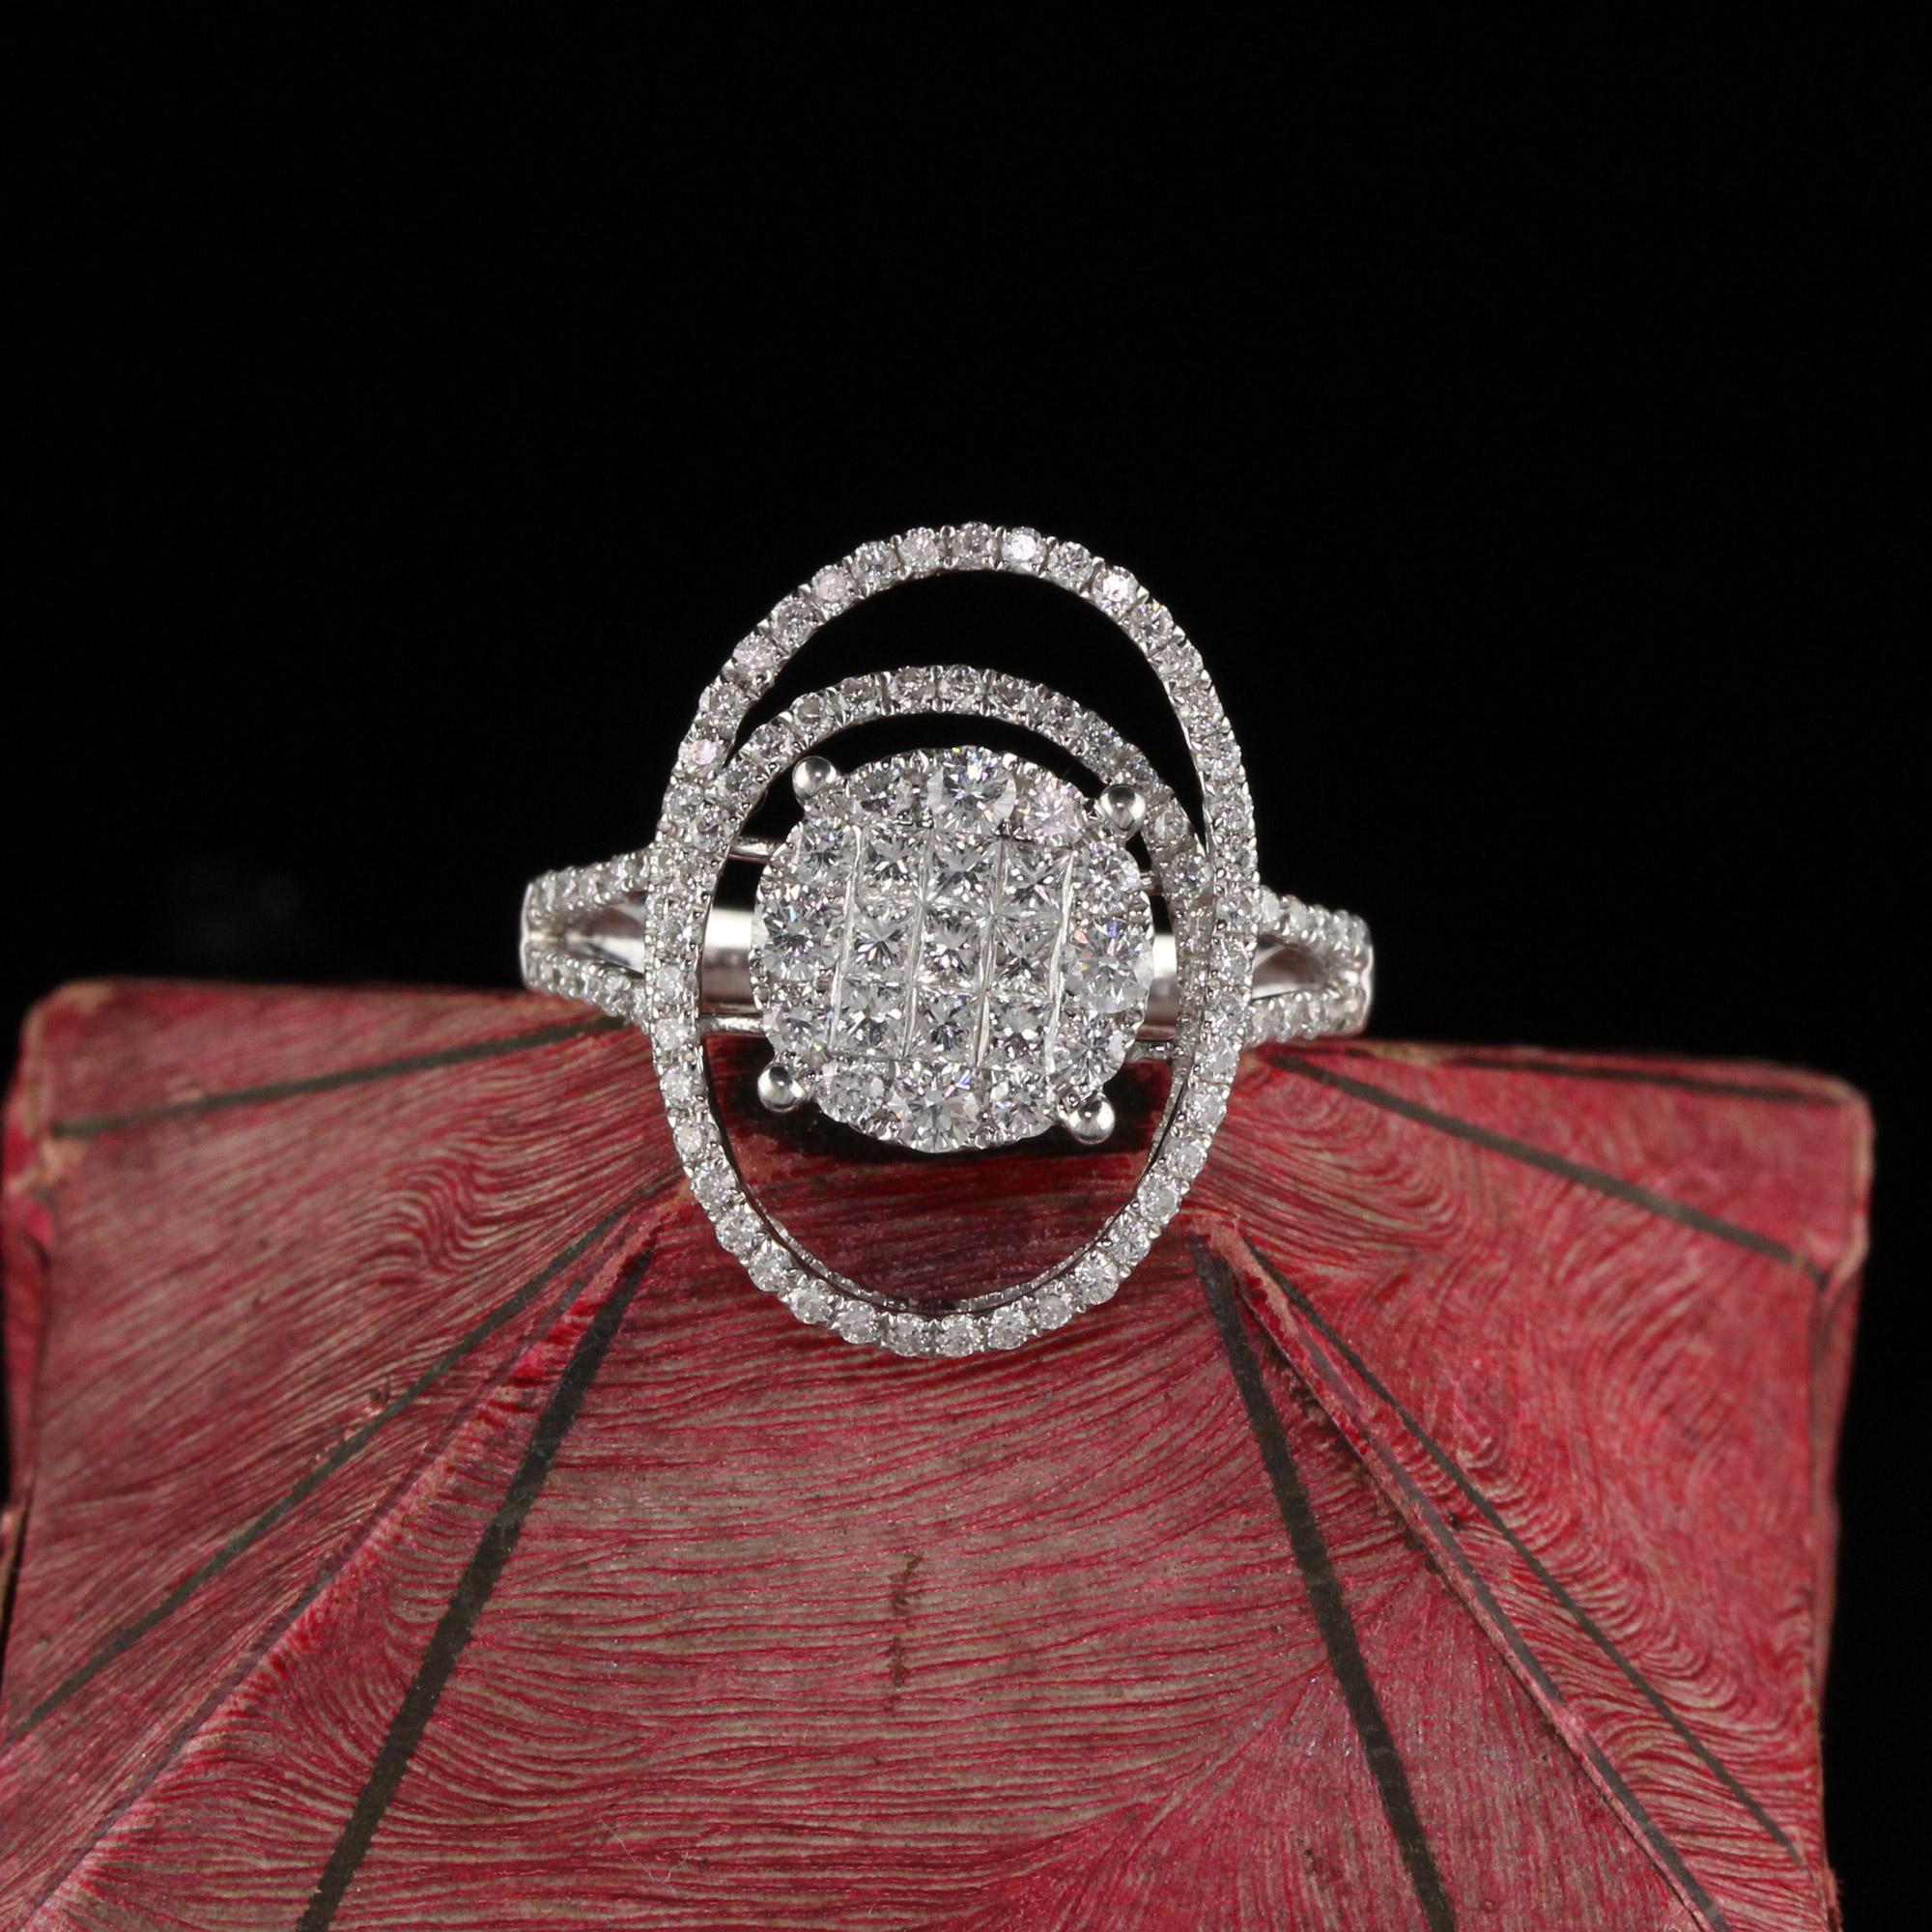 Elegant and beautifully designed diamond ring with cluster style center.

Metal: 14K White Gold

Weight: 4.0 Grams

Total Diamond Weight: Approximately 1.10 ct.

Diamond Color: H

Diamond Clarity: VS2

Ring Size: 6.25 (sizable)

Measurements: 19.35